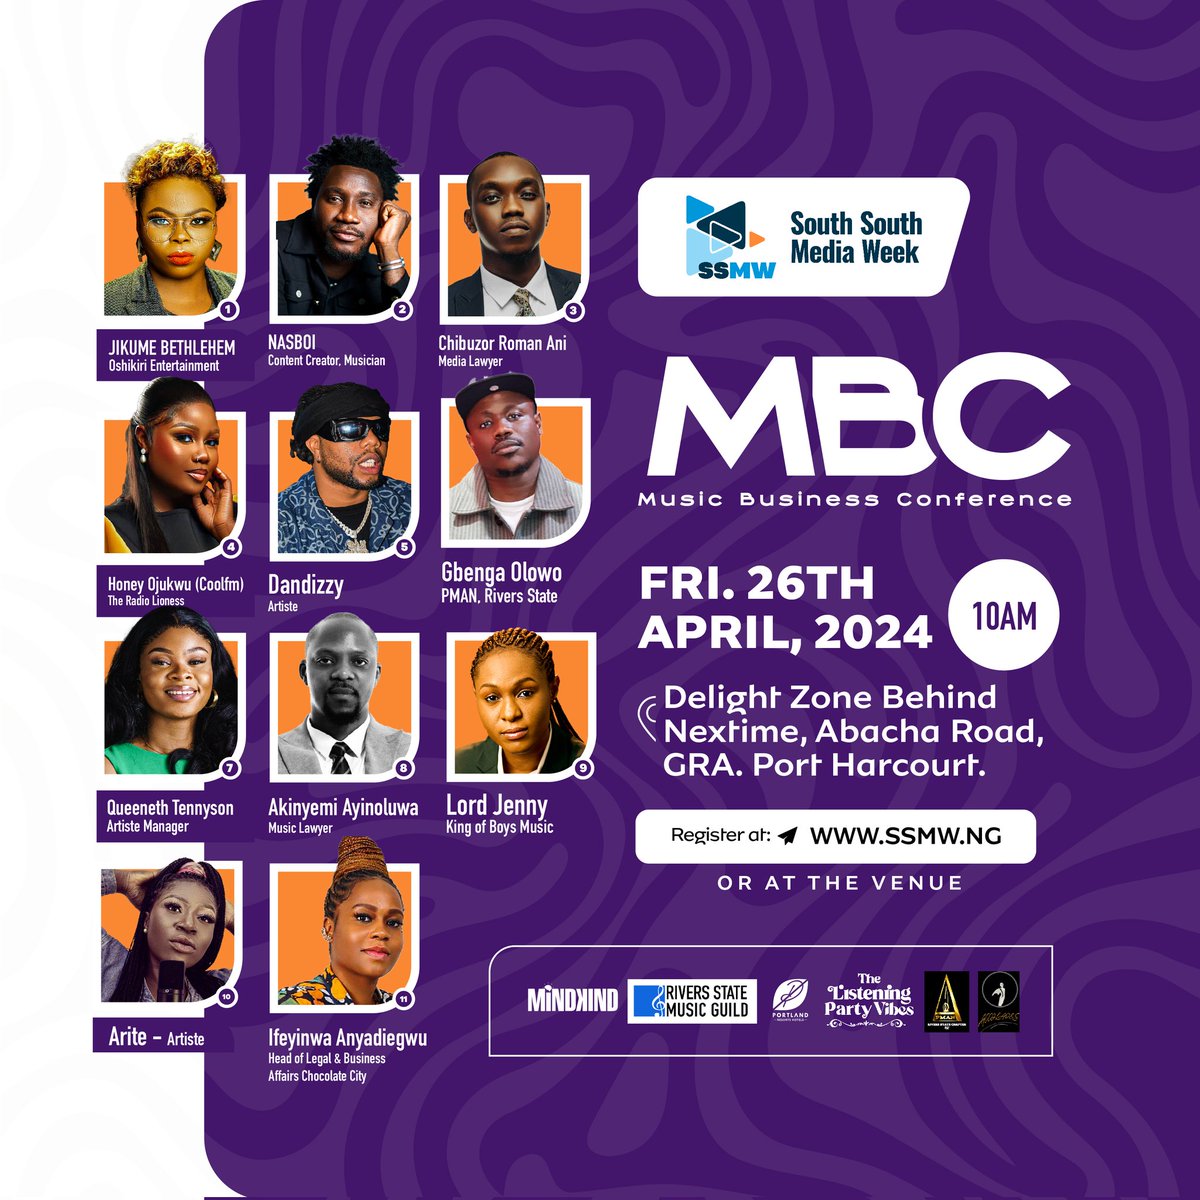 Hey people it's my pleasure to announce that I'll be on the session of the Music Business Conference at the South South Media week in PH city, where we'll be discussing the music space as well as the way forward for artistes in the south east.